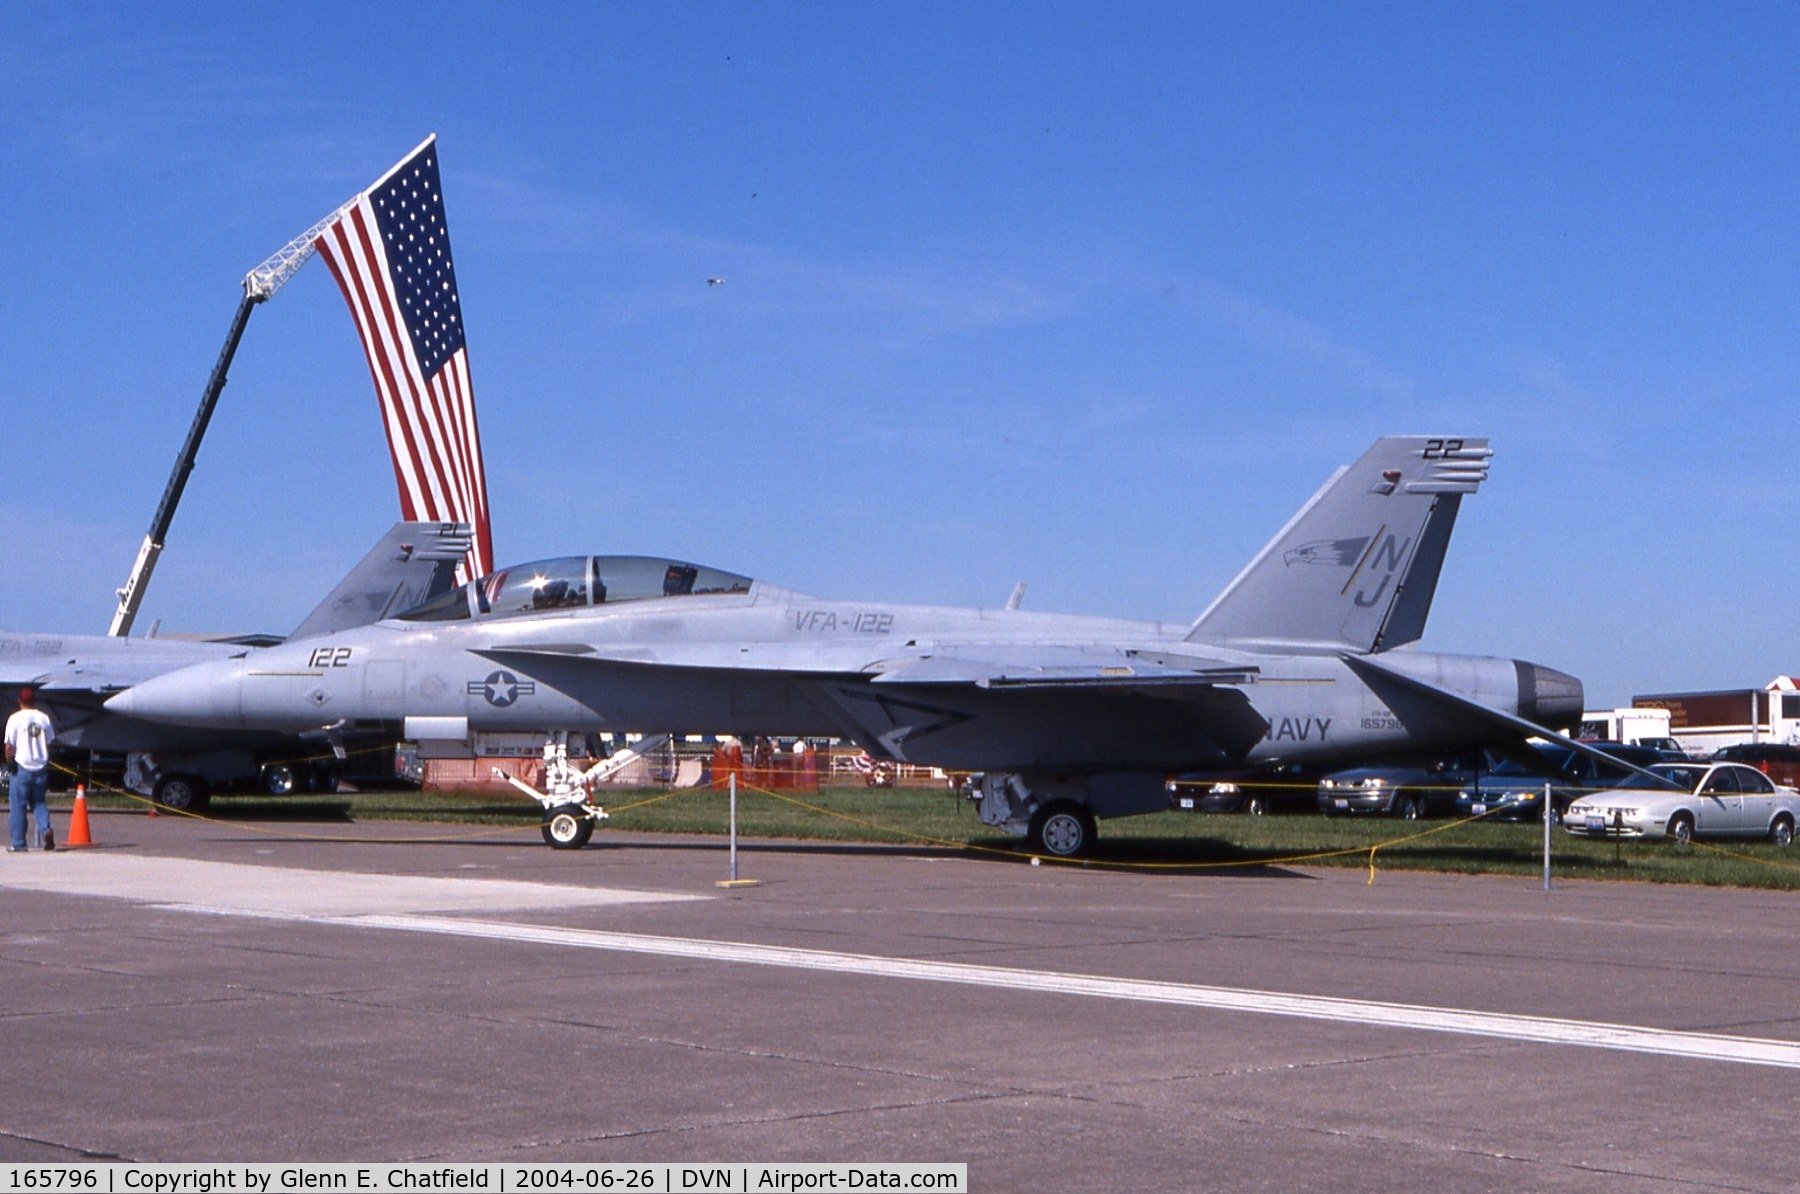 165796, Boeing F/A-18F Super Hornet C/N 1524/F022, F/A-18F at the Quad Cities Air Show